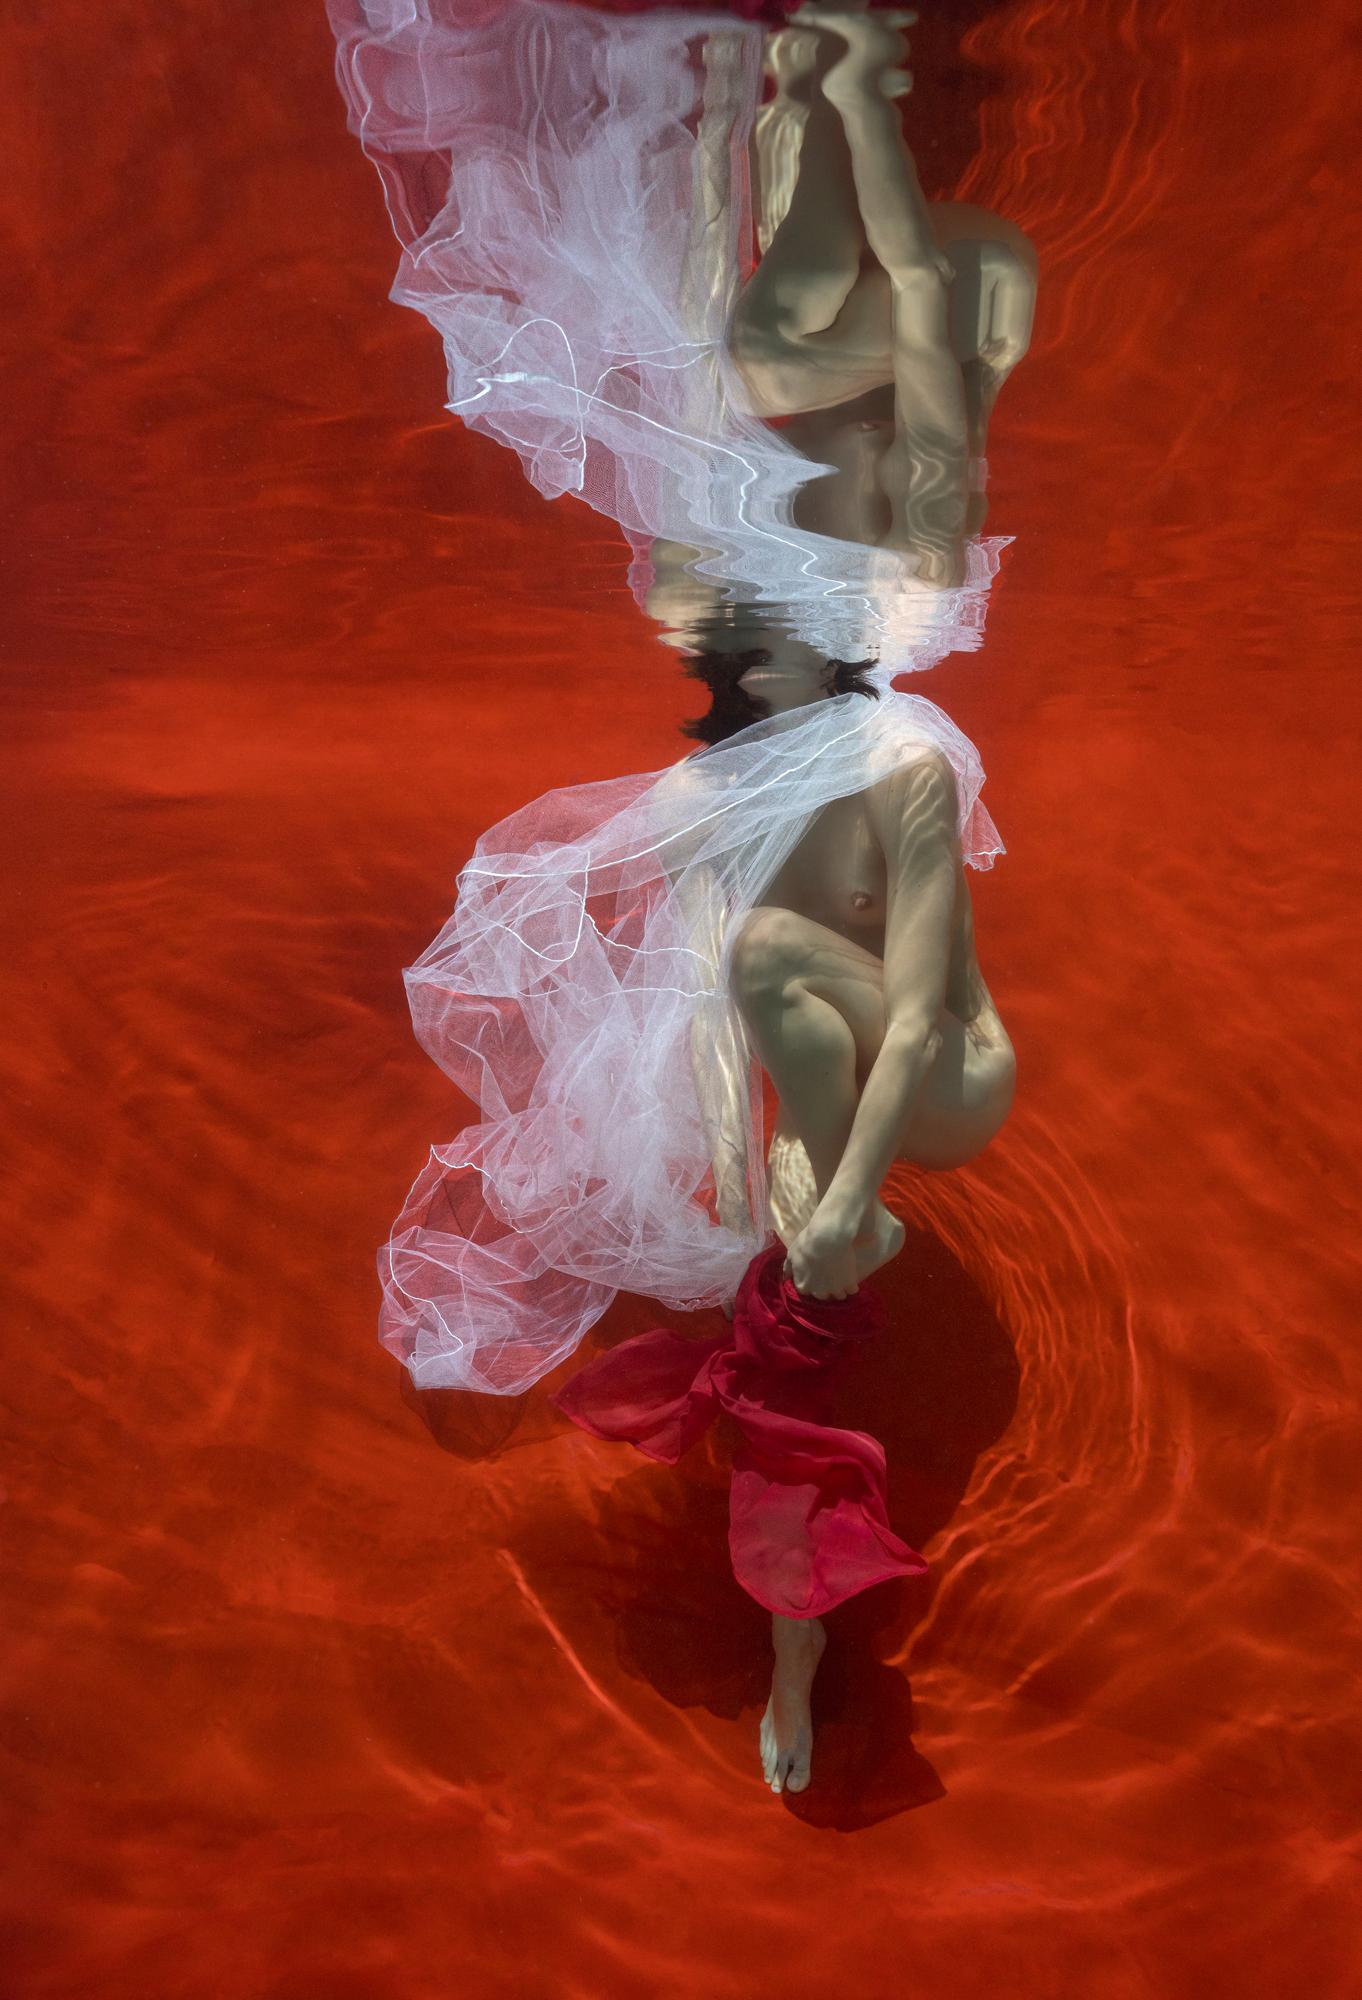 Alex Sher Color Photograph - Blood and Milk V   - underwater nude photograph - print on aluminum 36" x 24"